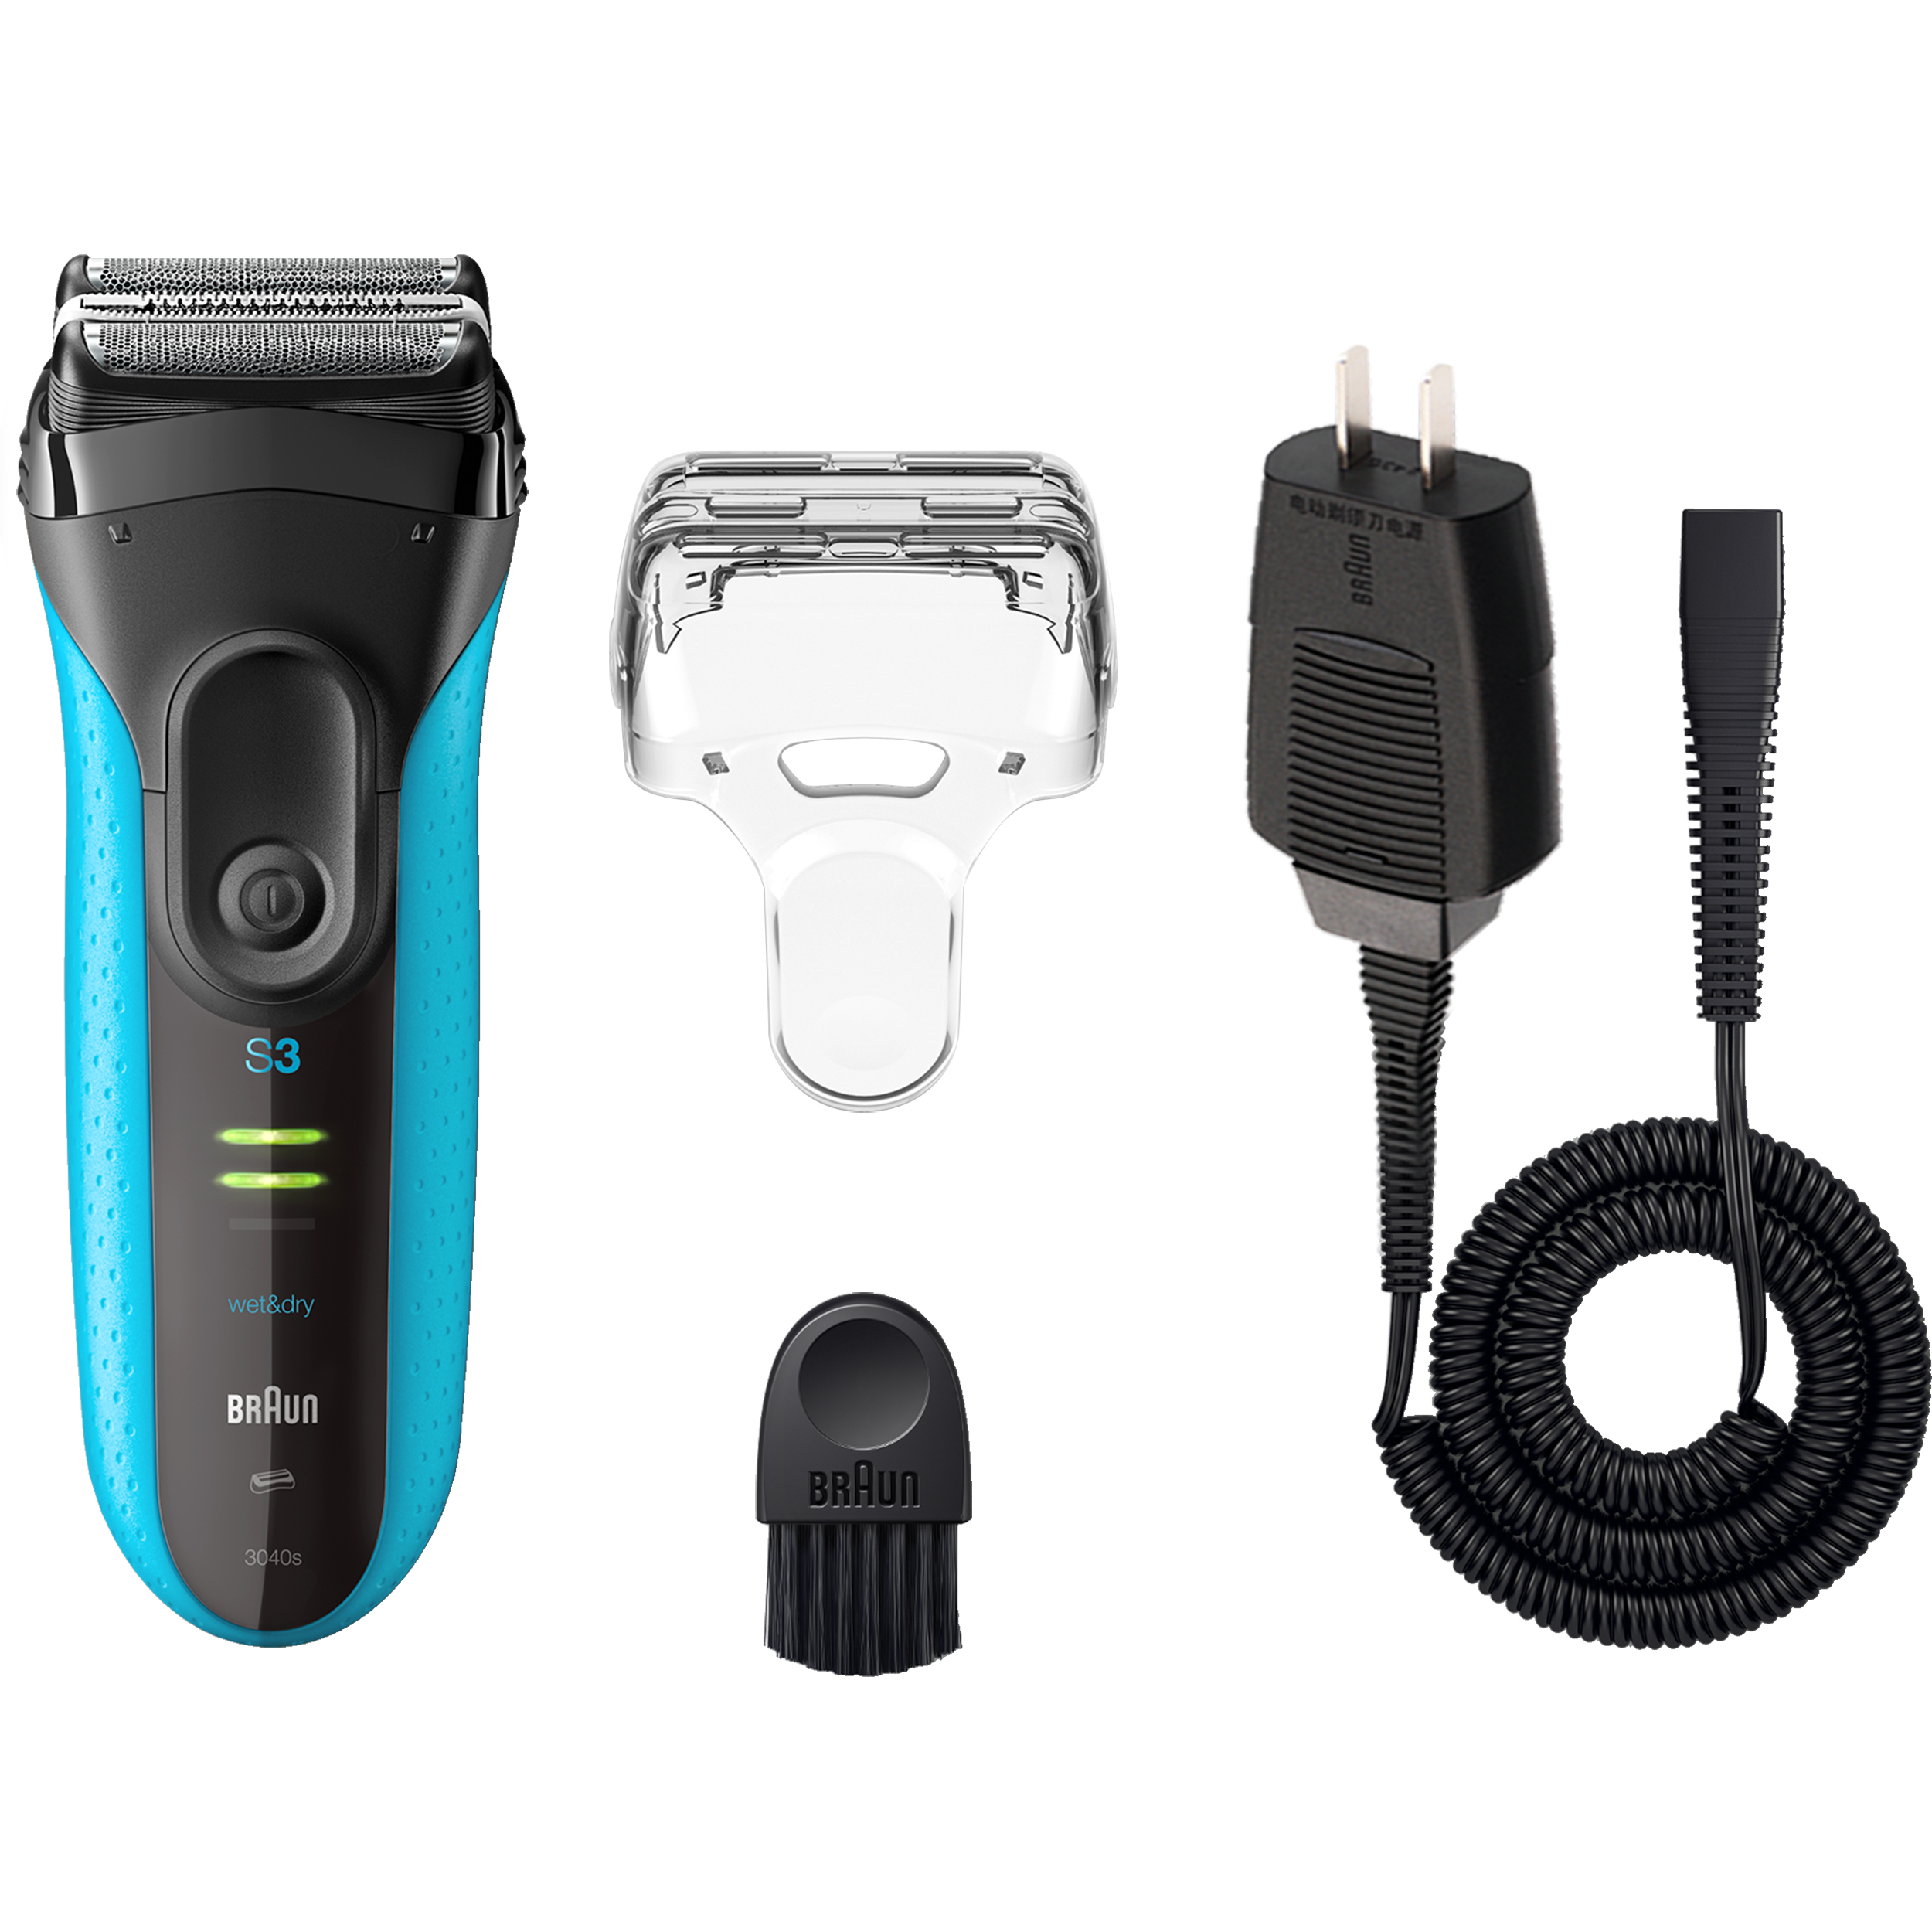 Braun Series 3 ProSkin 3040s Wet Dry Electric Shaver, Charging Stand - image 1 of 6